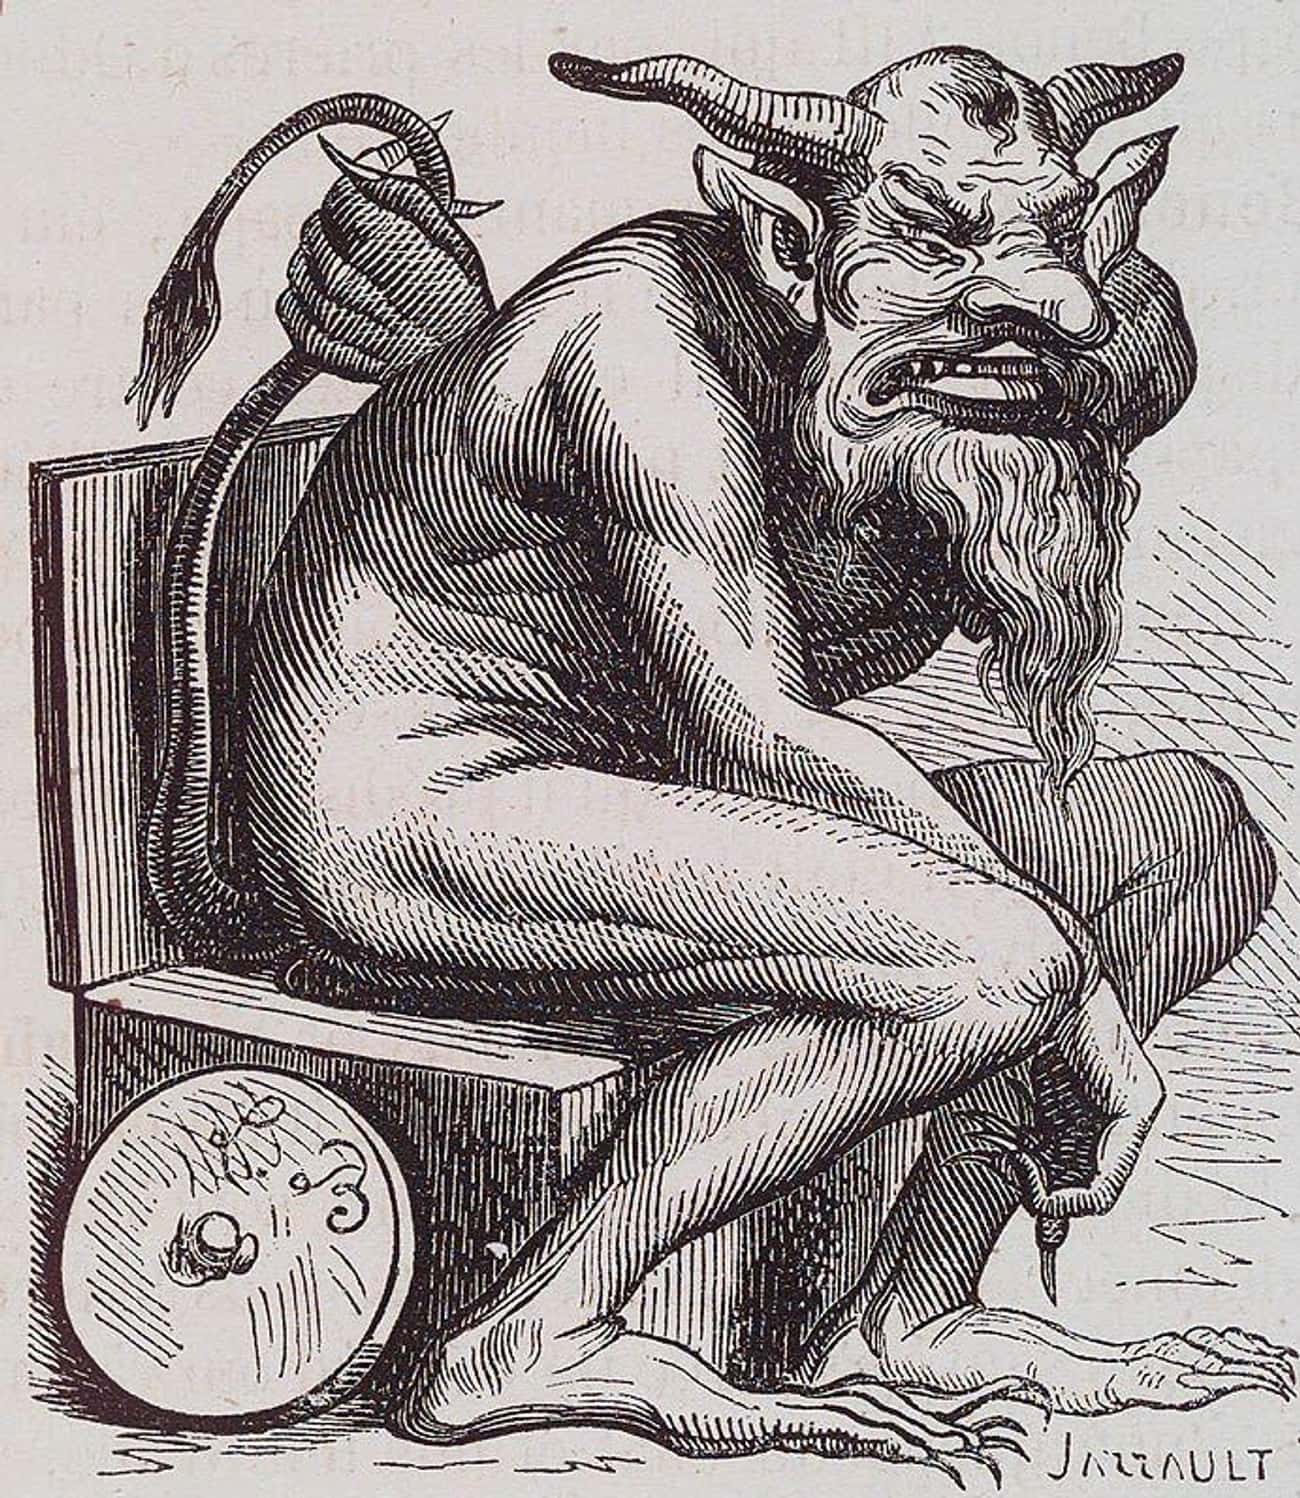 Pretty Much Everything We Know About Belphegor Comes From An 1818 Book